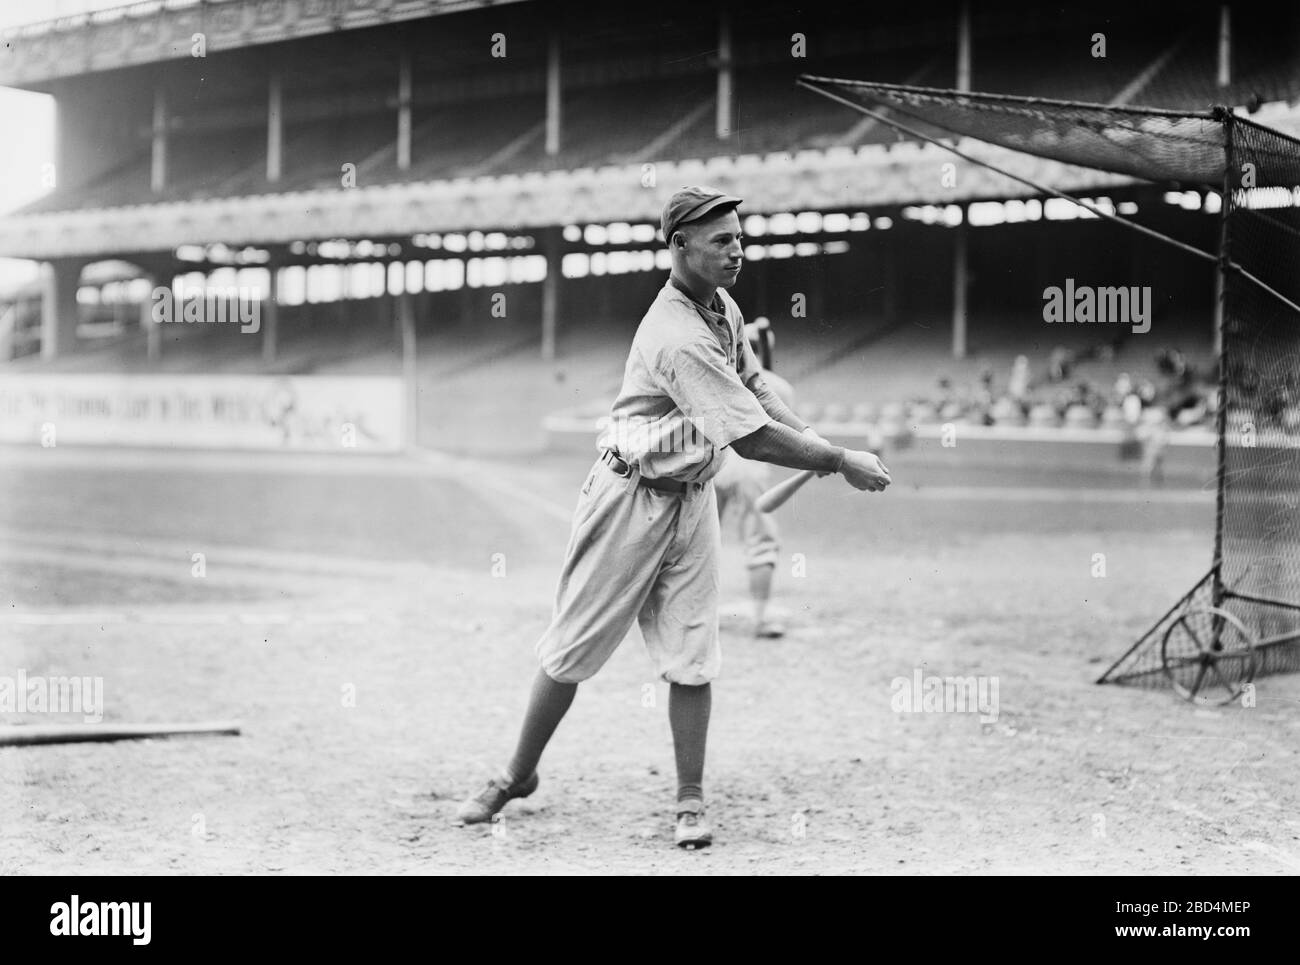 Chicago cubs players Black and White Stock Photos & Images - Alamy